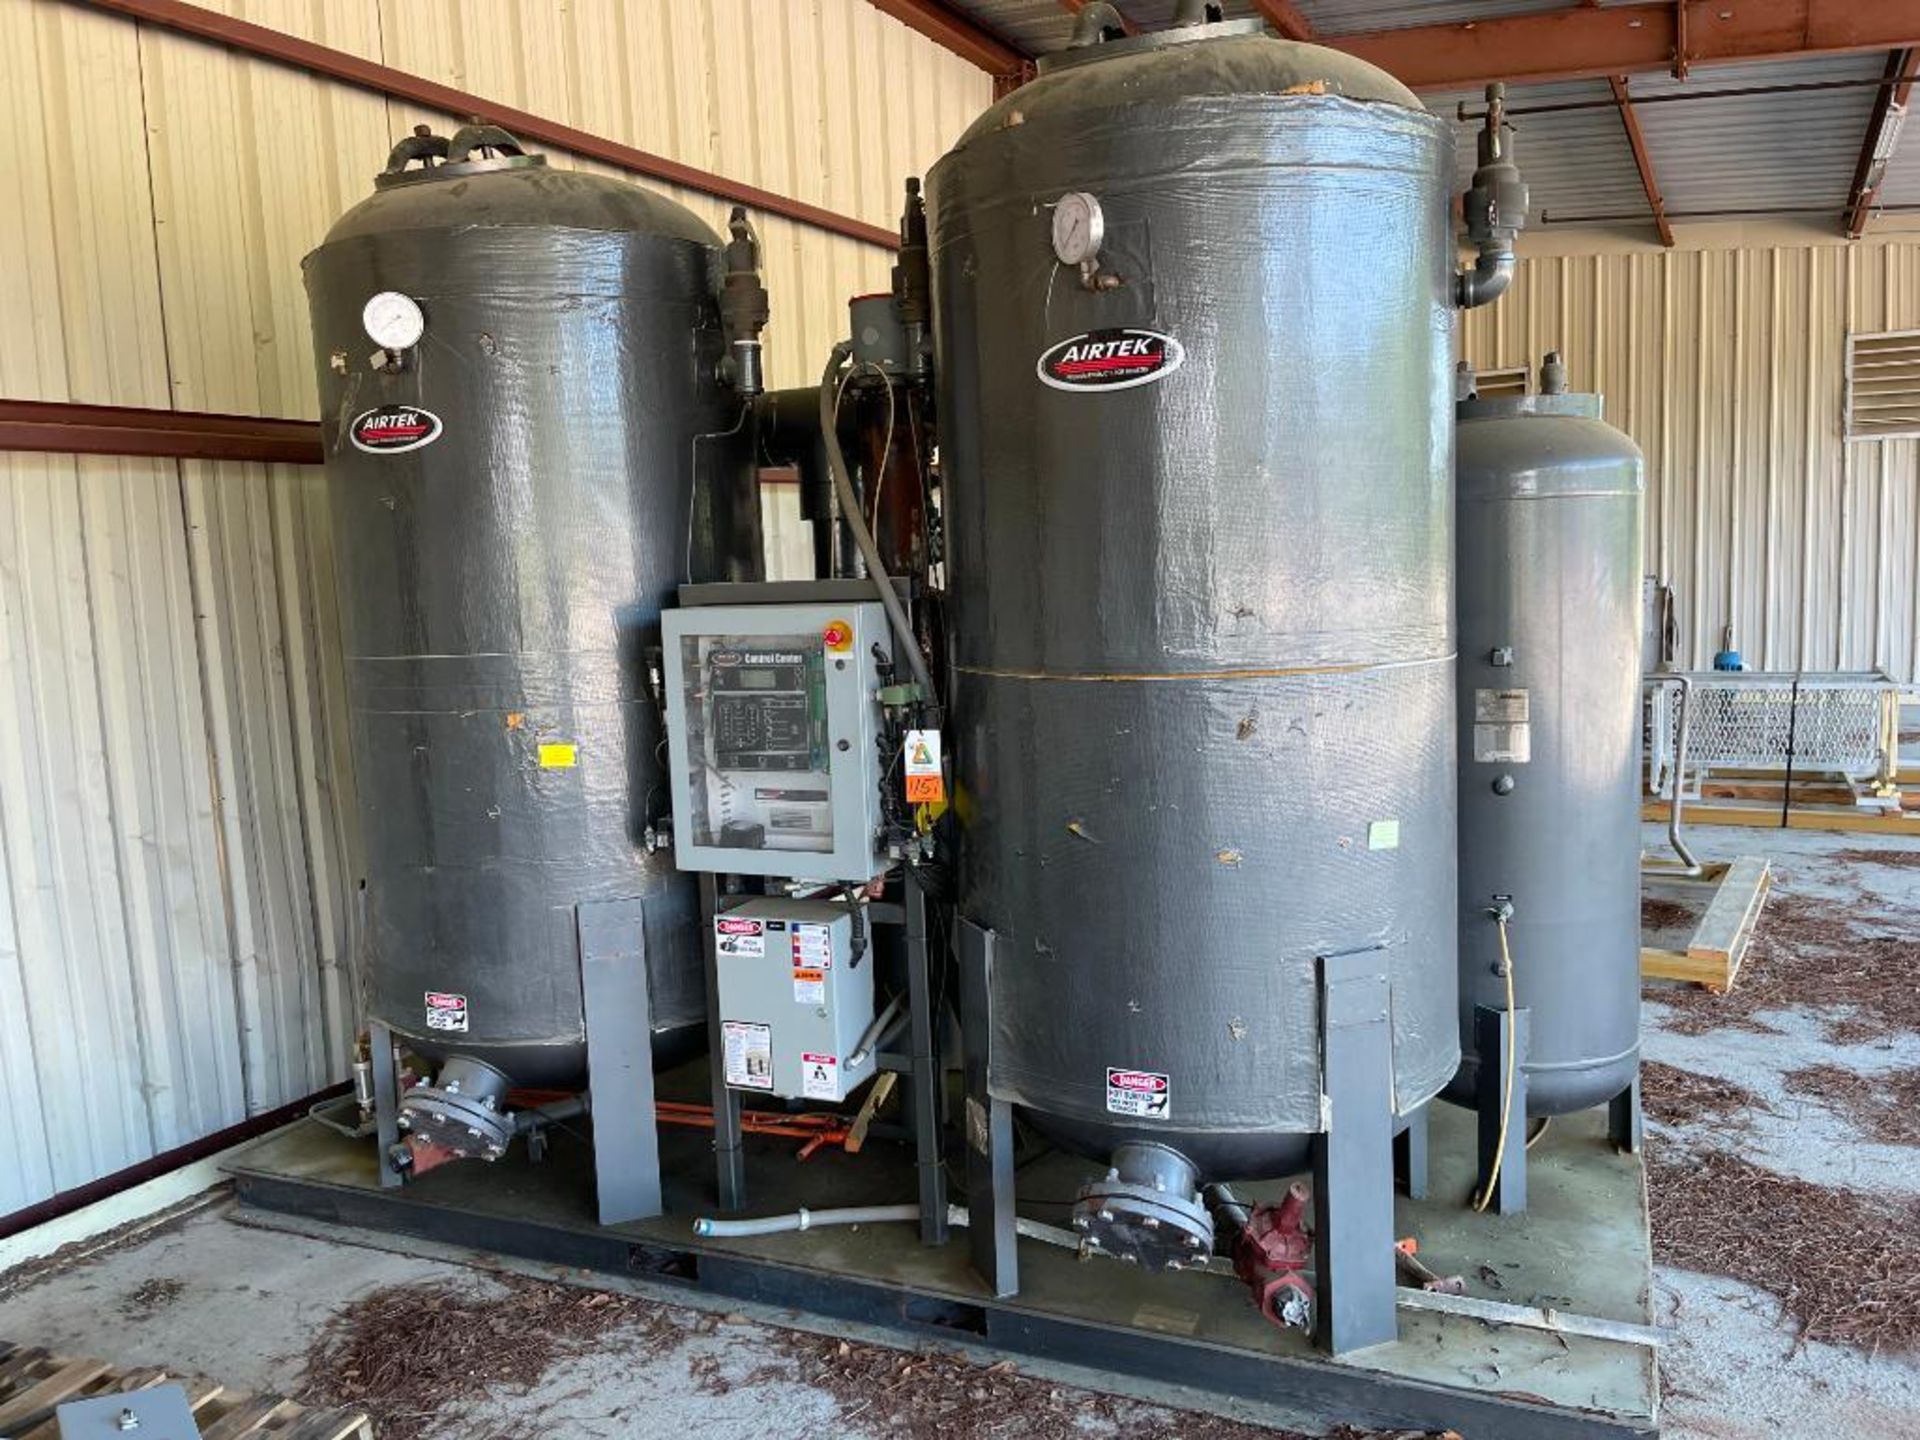 AirTek twin tower externally heated compressed air dryer - Located in Tifton, GA - Image 8 of 29